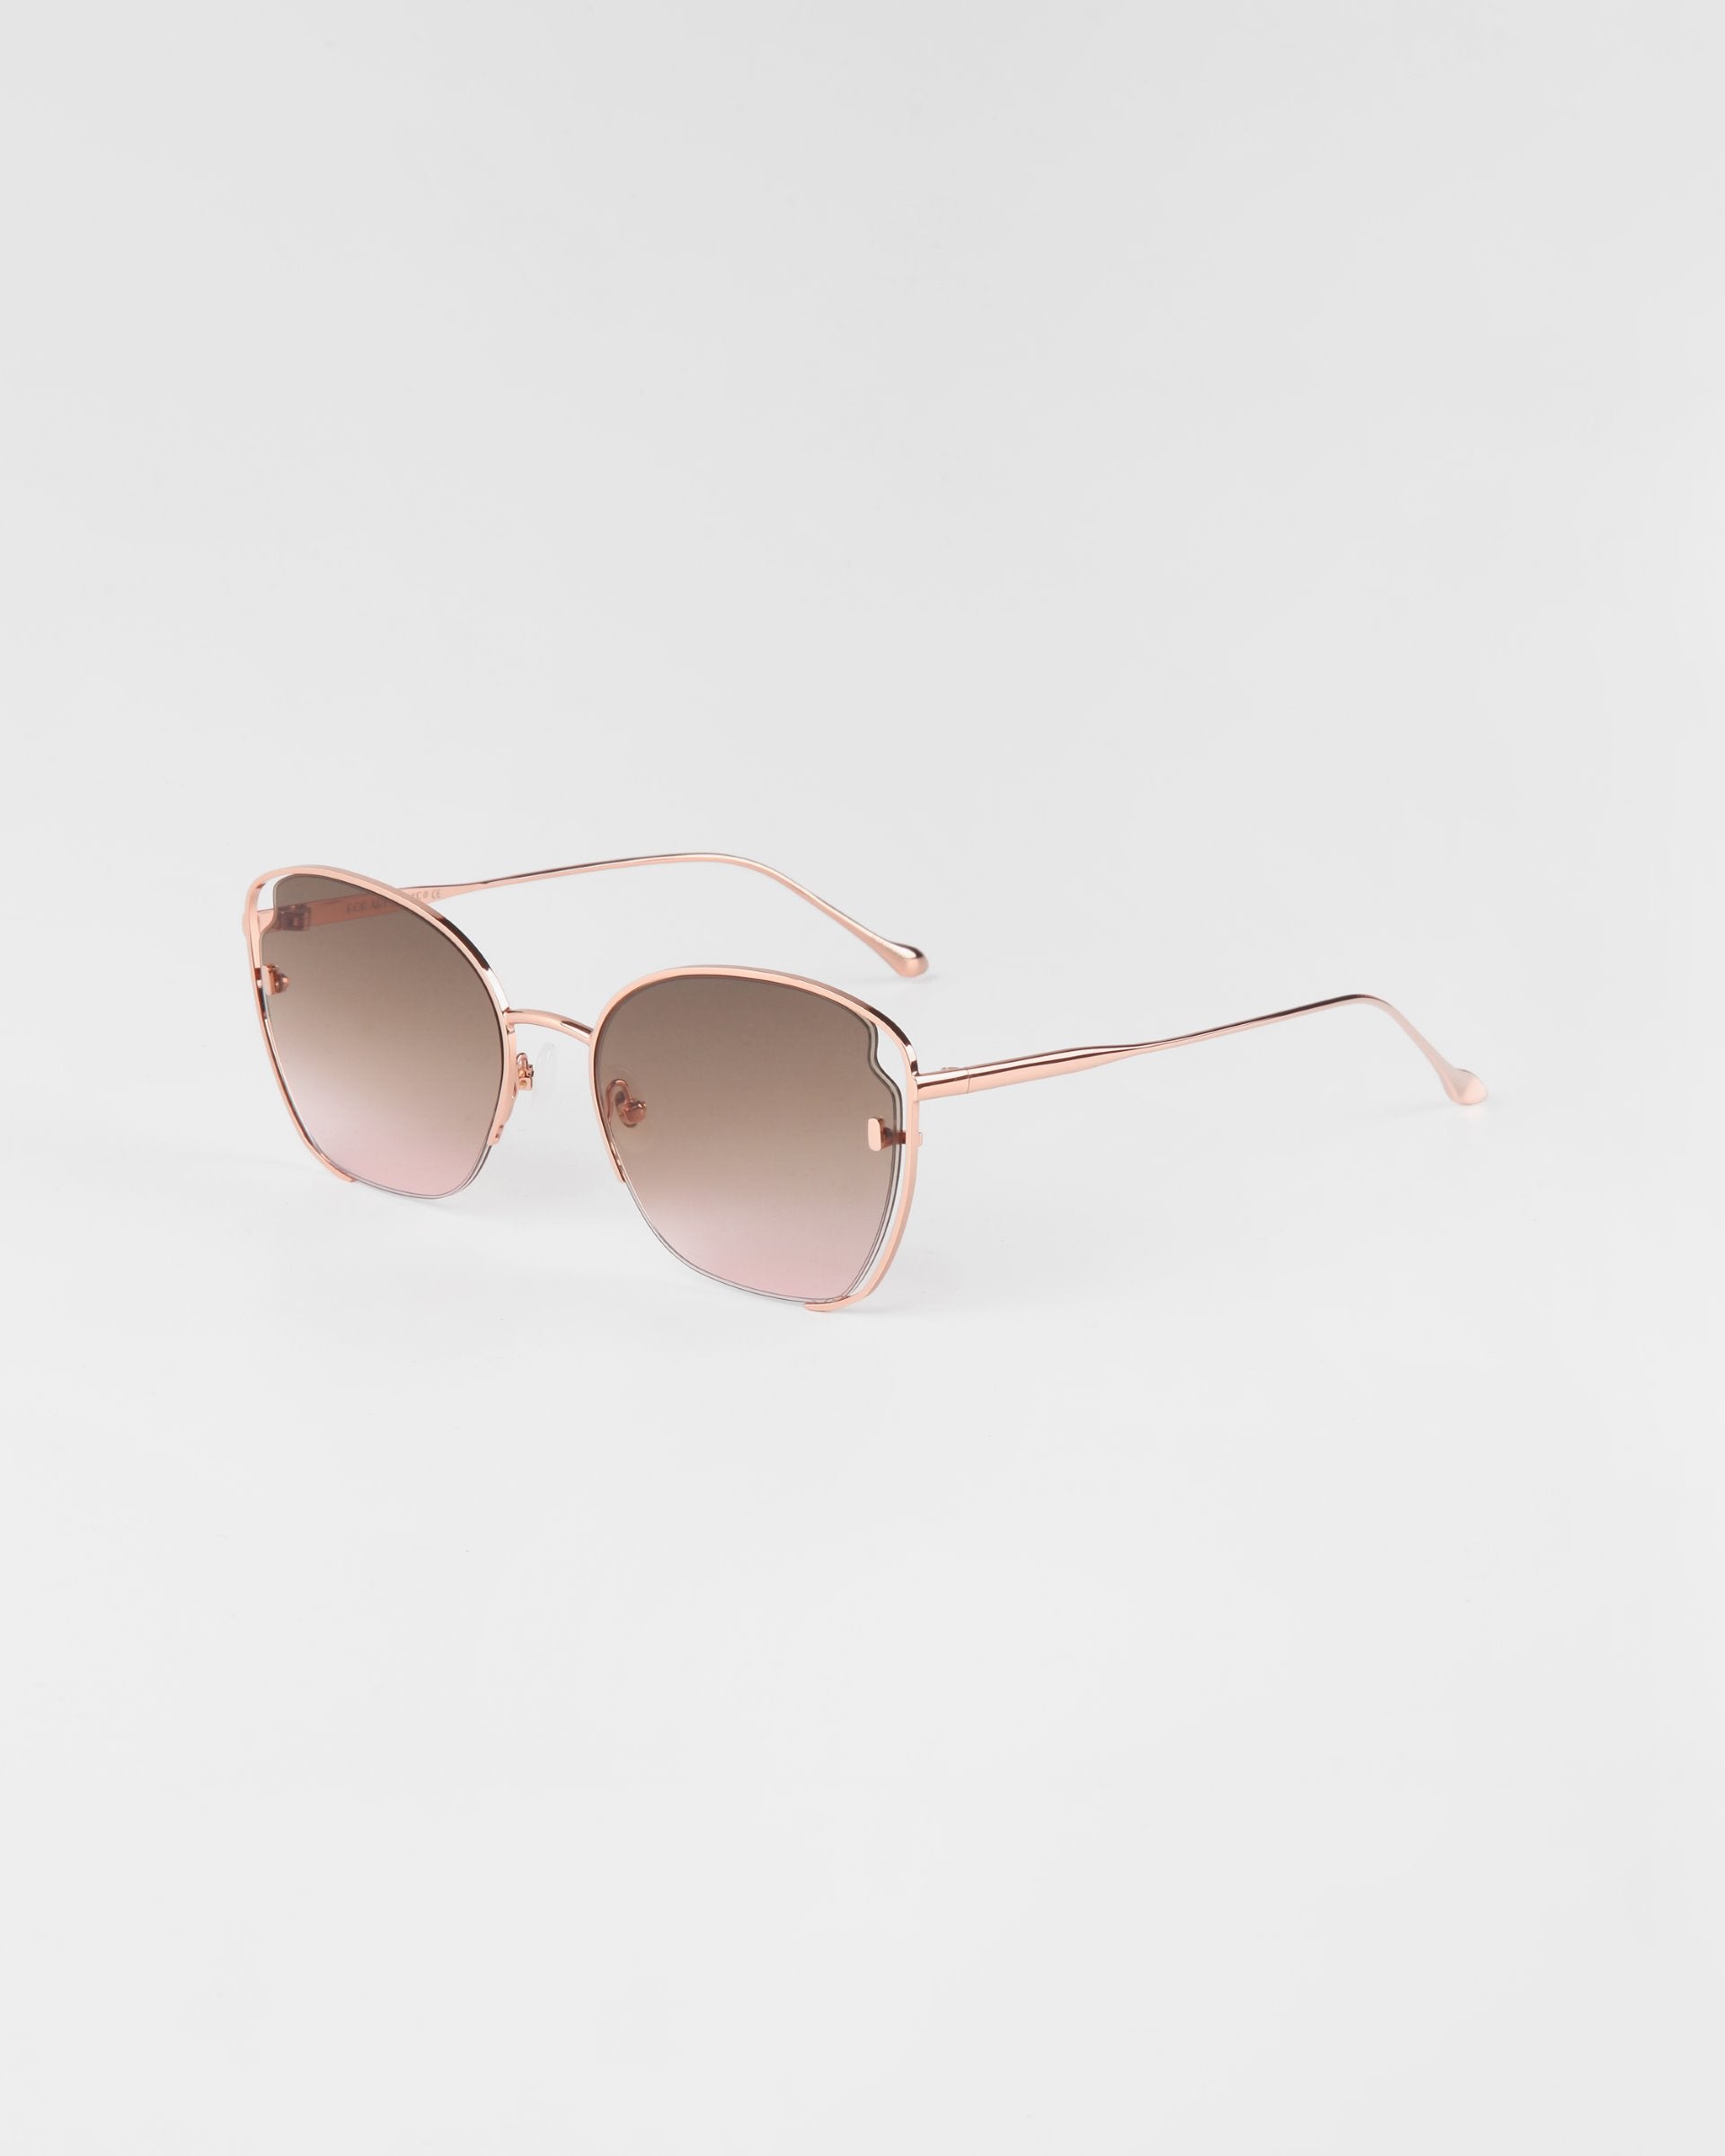 A pair of stylish For Art&#39;s Sake® Eden sunglasses, 18-karat gold plated with a thin metal frame and gradient lenses. The design features a slight cat-eye shape and sleek temples, offering UVA &amp; UVB protection as they cast a soft shadow on the white background.